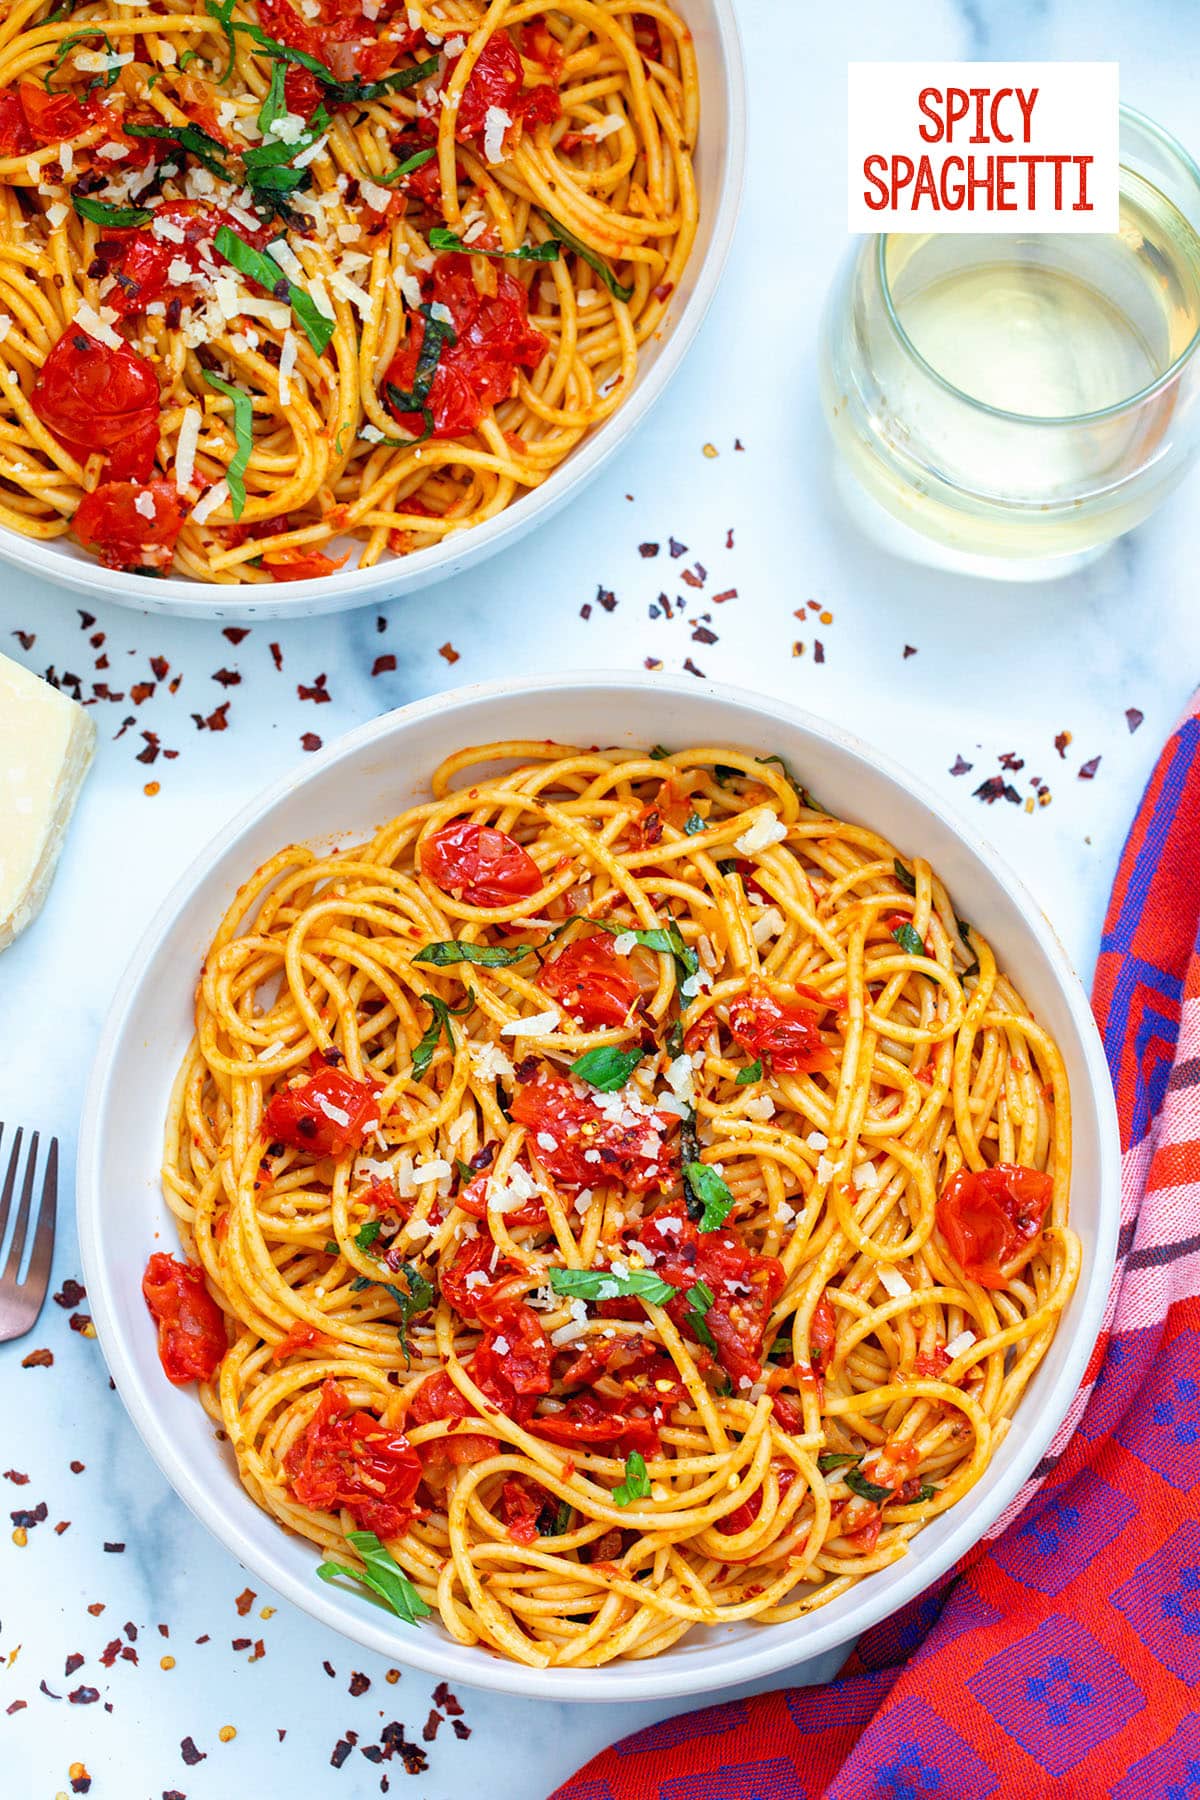 Two bowls of spicy spaghetti with fresh tomatoes and basil with red pepper flakes all around, a glass in the background and recipe title at top.